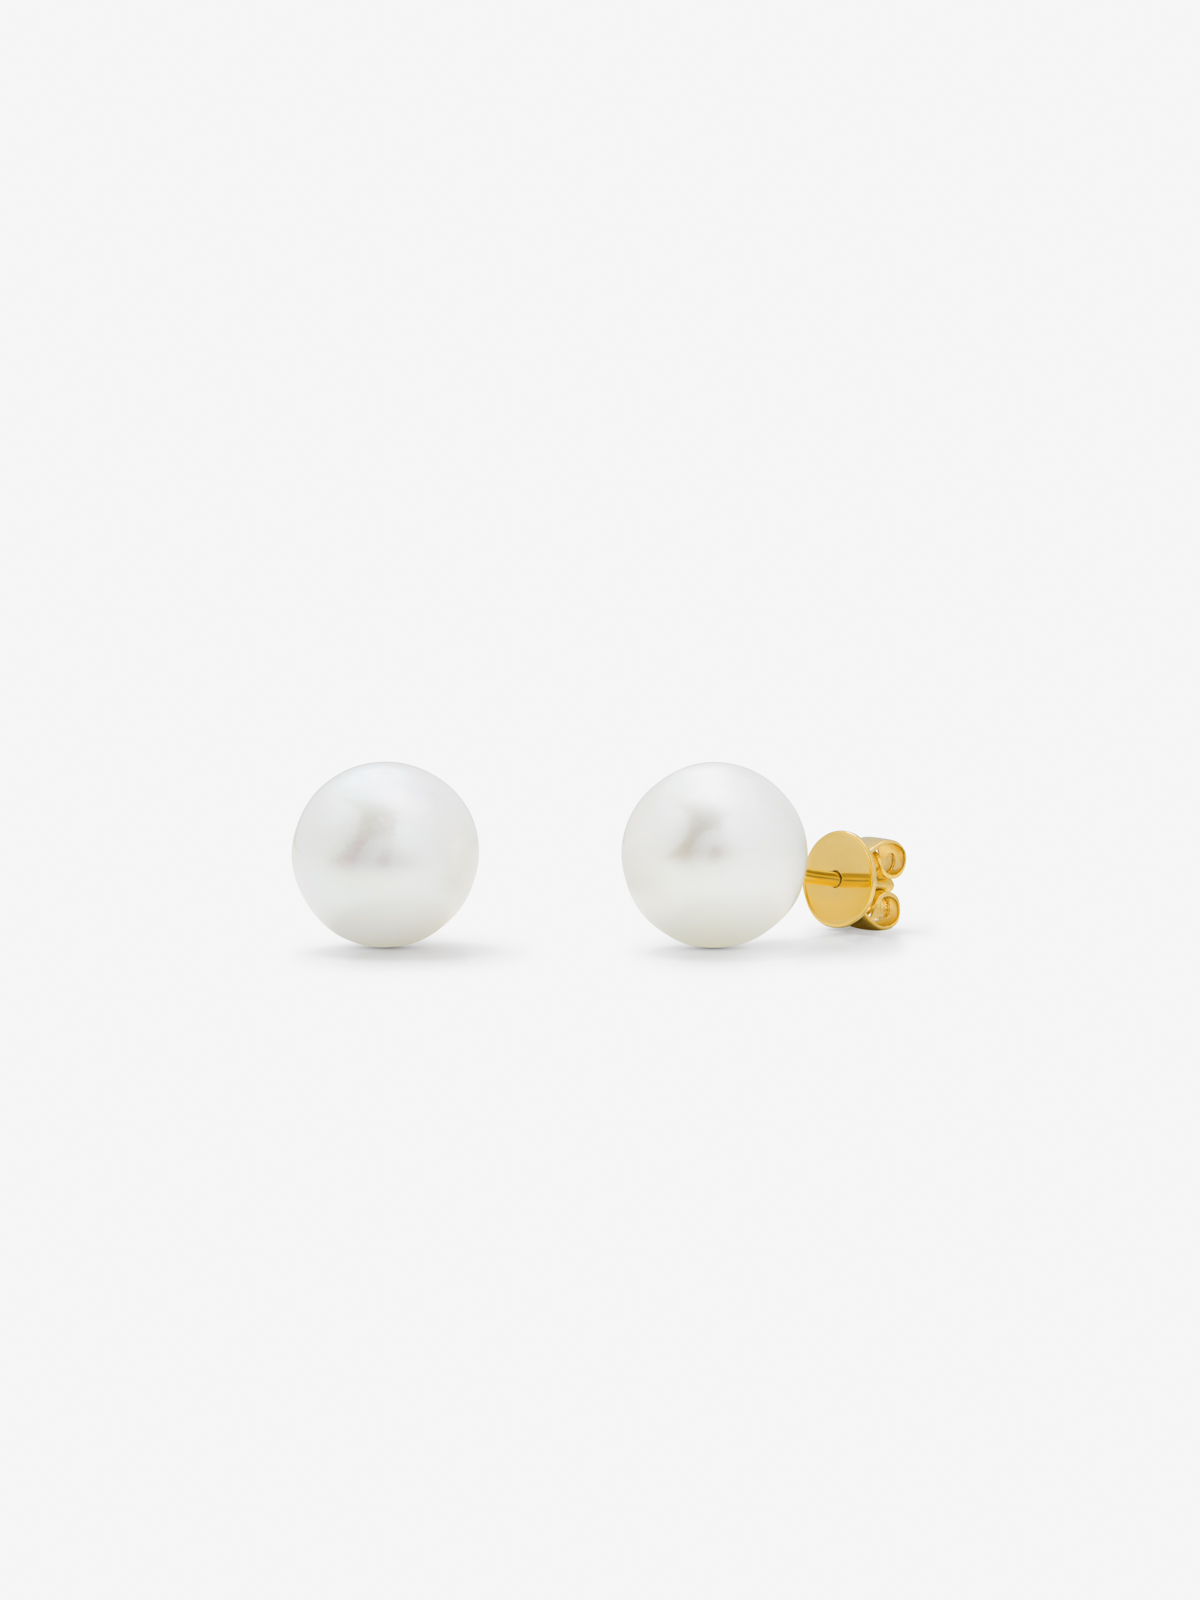 18k rose gold button earring with a 6.5 mm Akoya pearl.